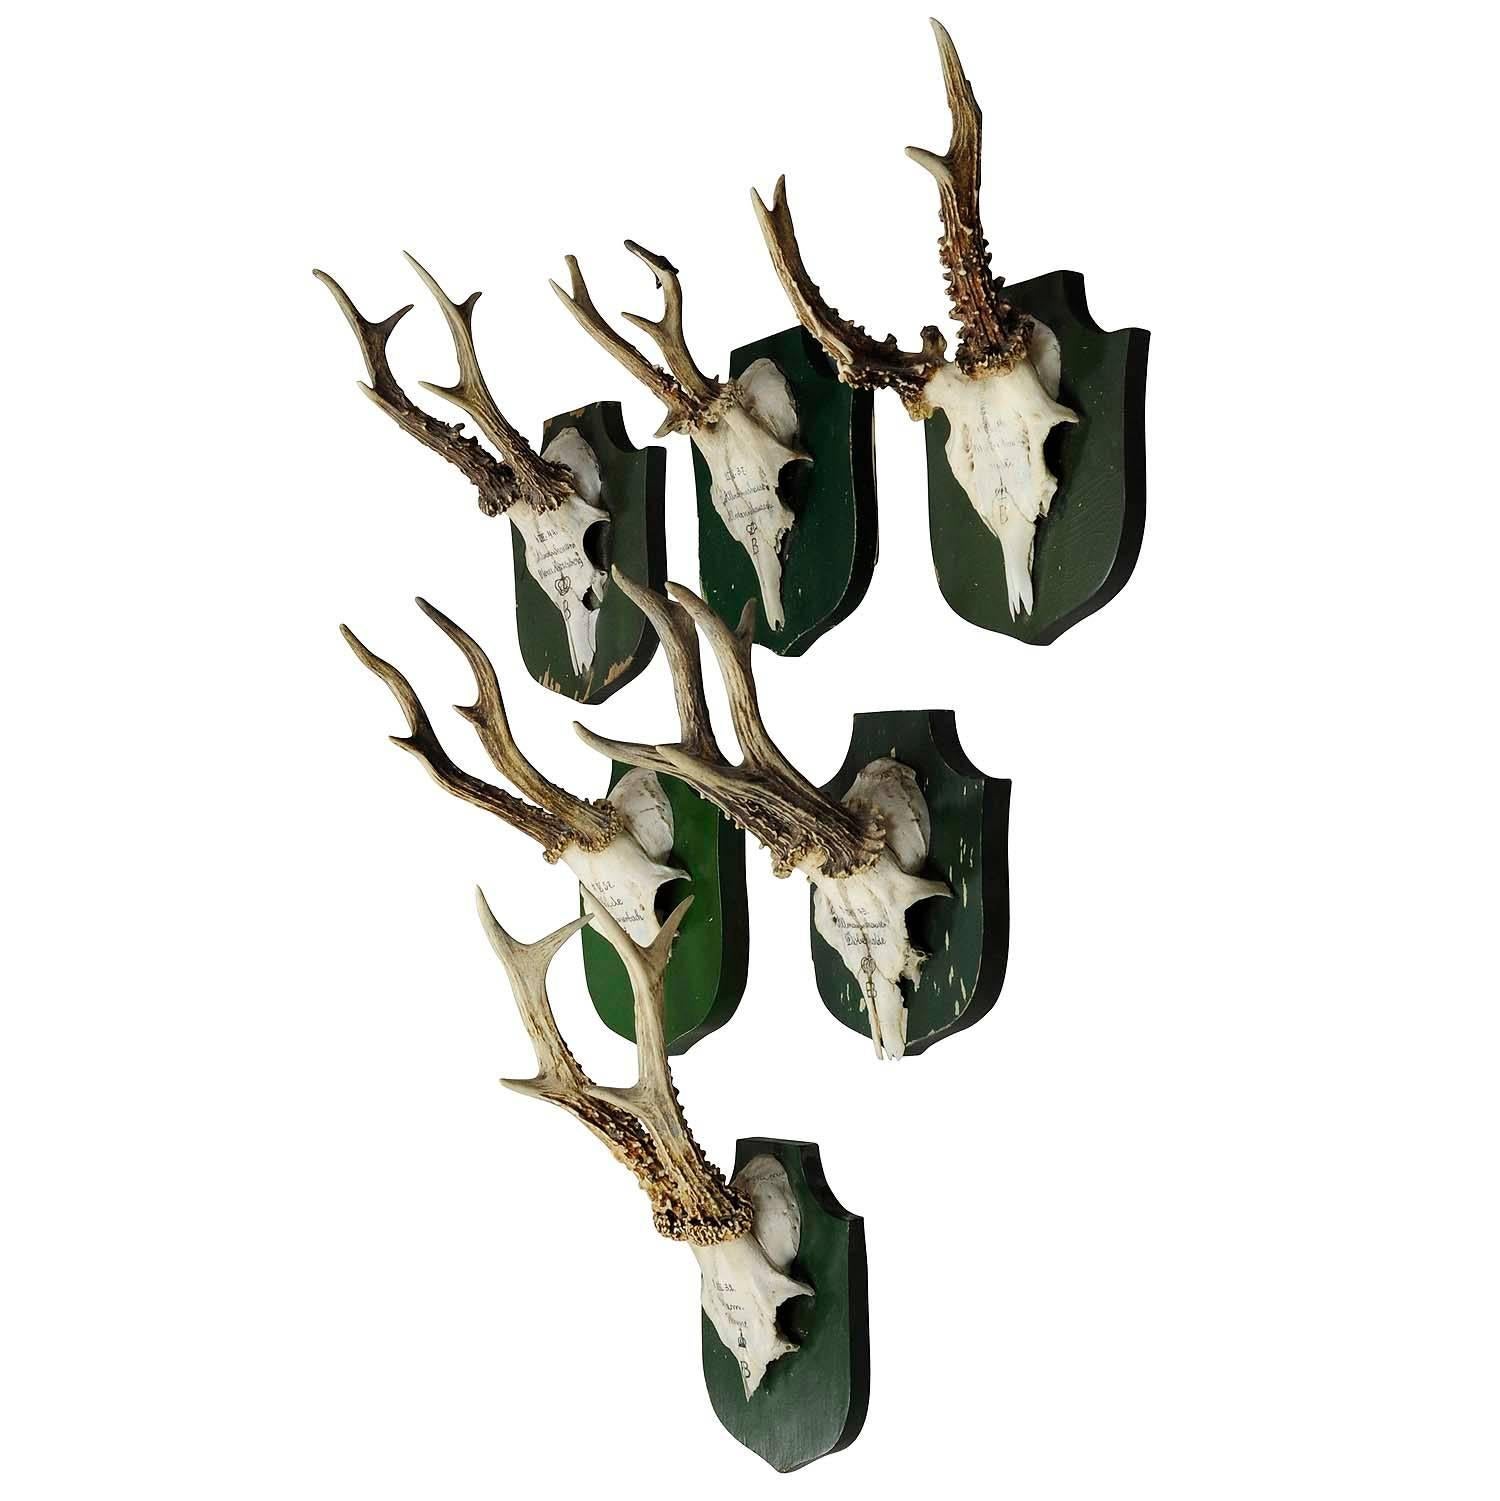 Six Deer Trophies on Plaques from Palace Salem, Germany